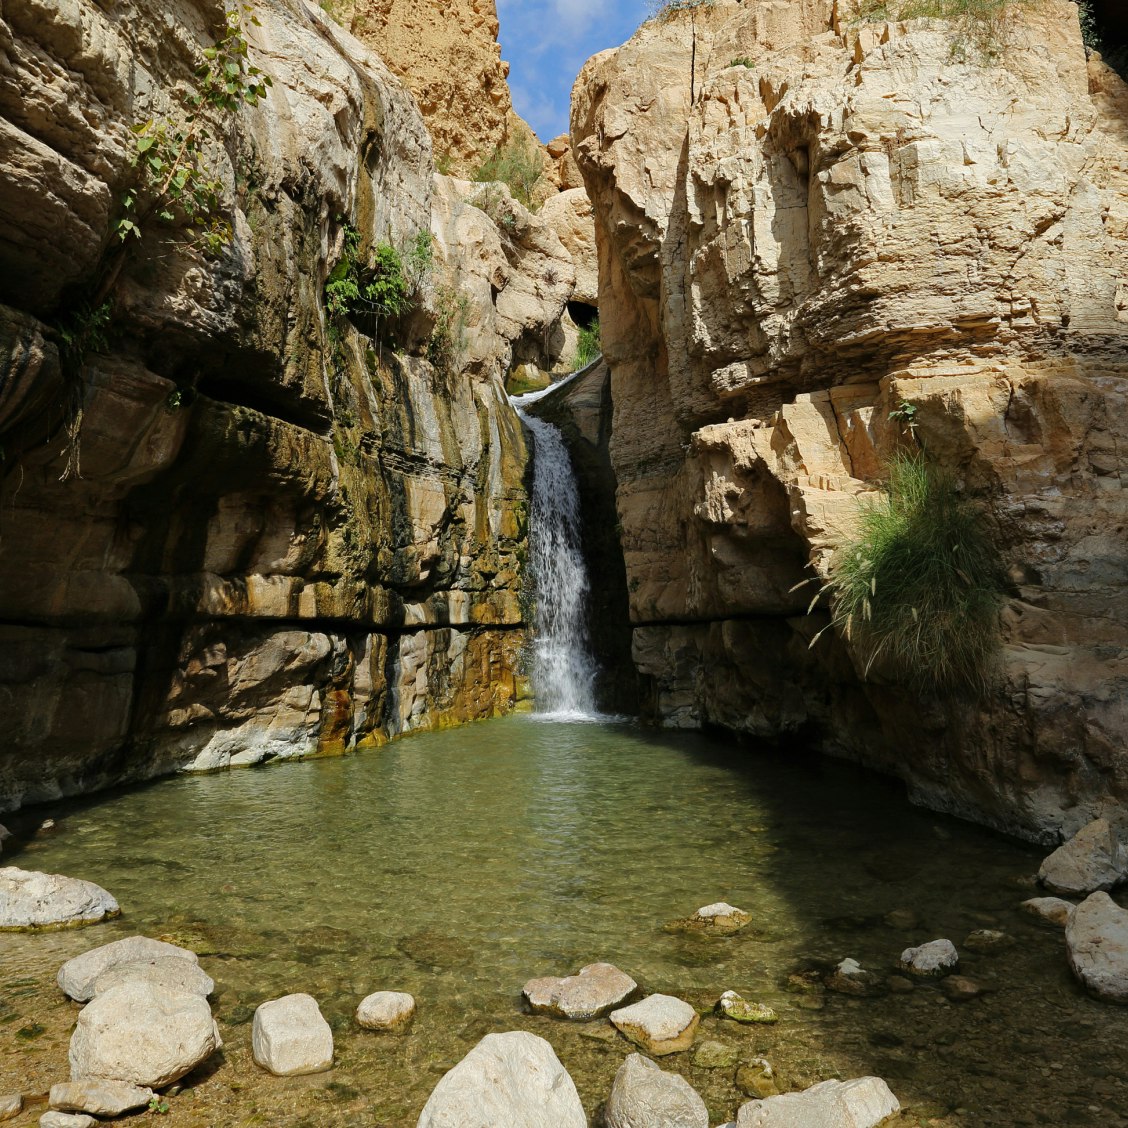 Wadi Arugot in Ein Gedi Nature reserve, Israel. One of the largest streams in the Judean desert. Picturesque Hidden waterfall is popular destination for hikers in the valley.; Shutterstock ID 637434220; Your name (First / Last): Lauren Keith; GL account no.: 65050; Netsuite department name: Online Editorial; Full Product or Project name including edition: Dead Sea Online Update